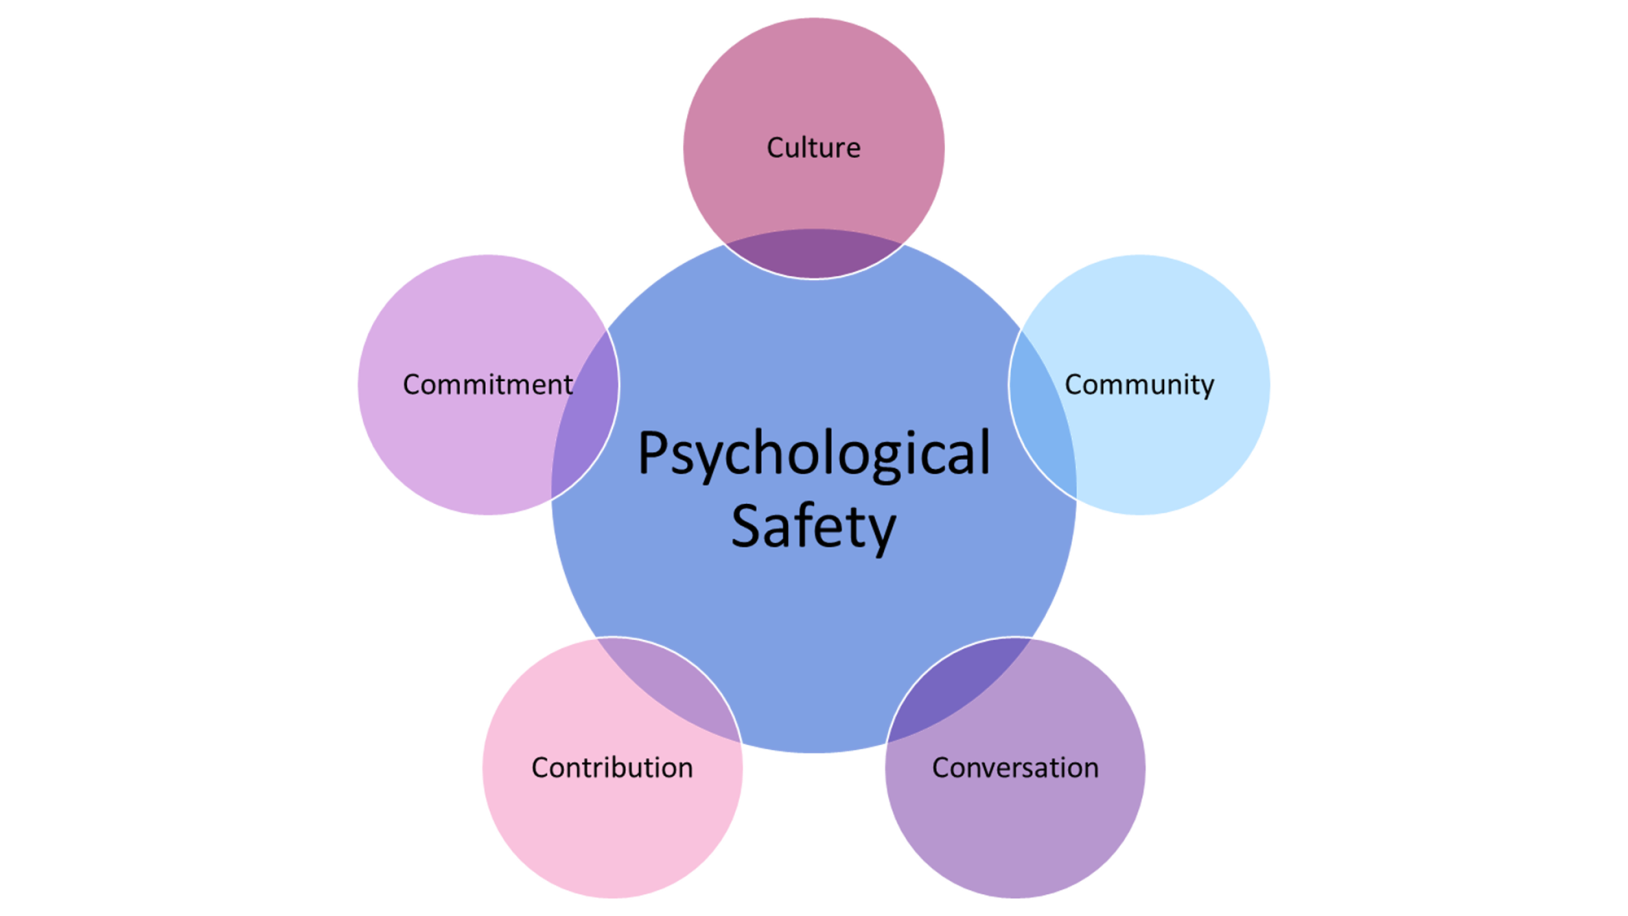 Psychological safety consits of 5 elments: Culture, Community, Conversation, Contribution, and Commitment